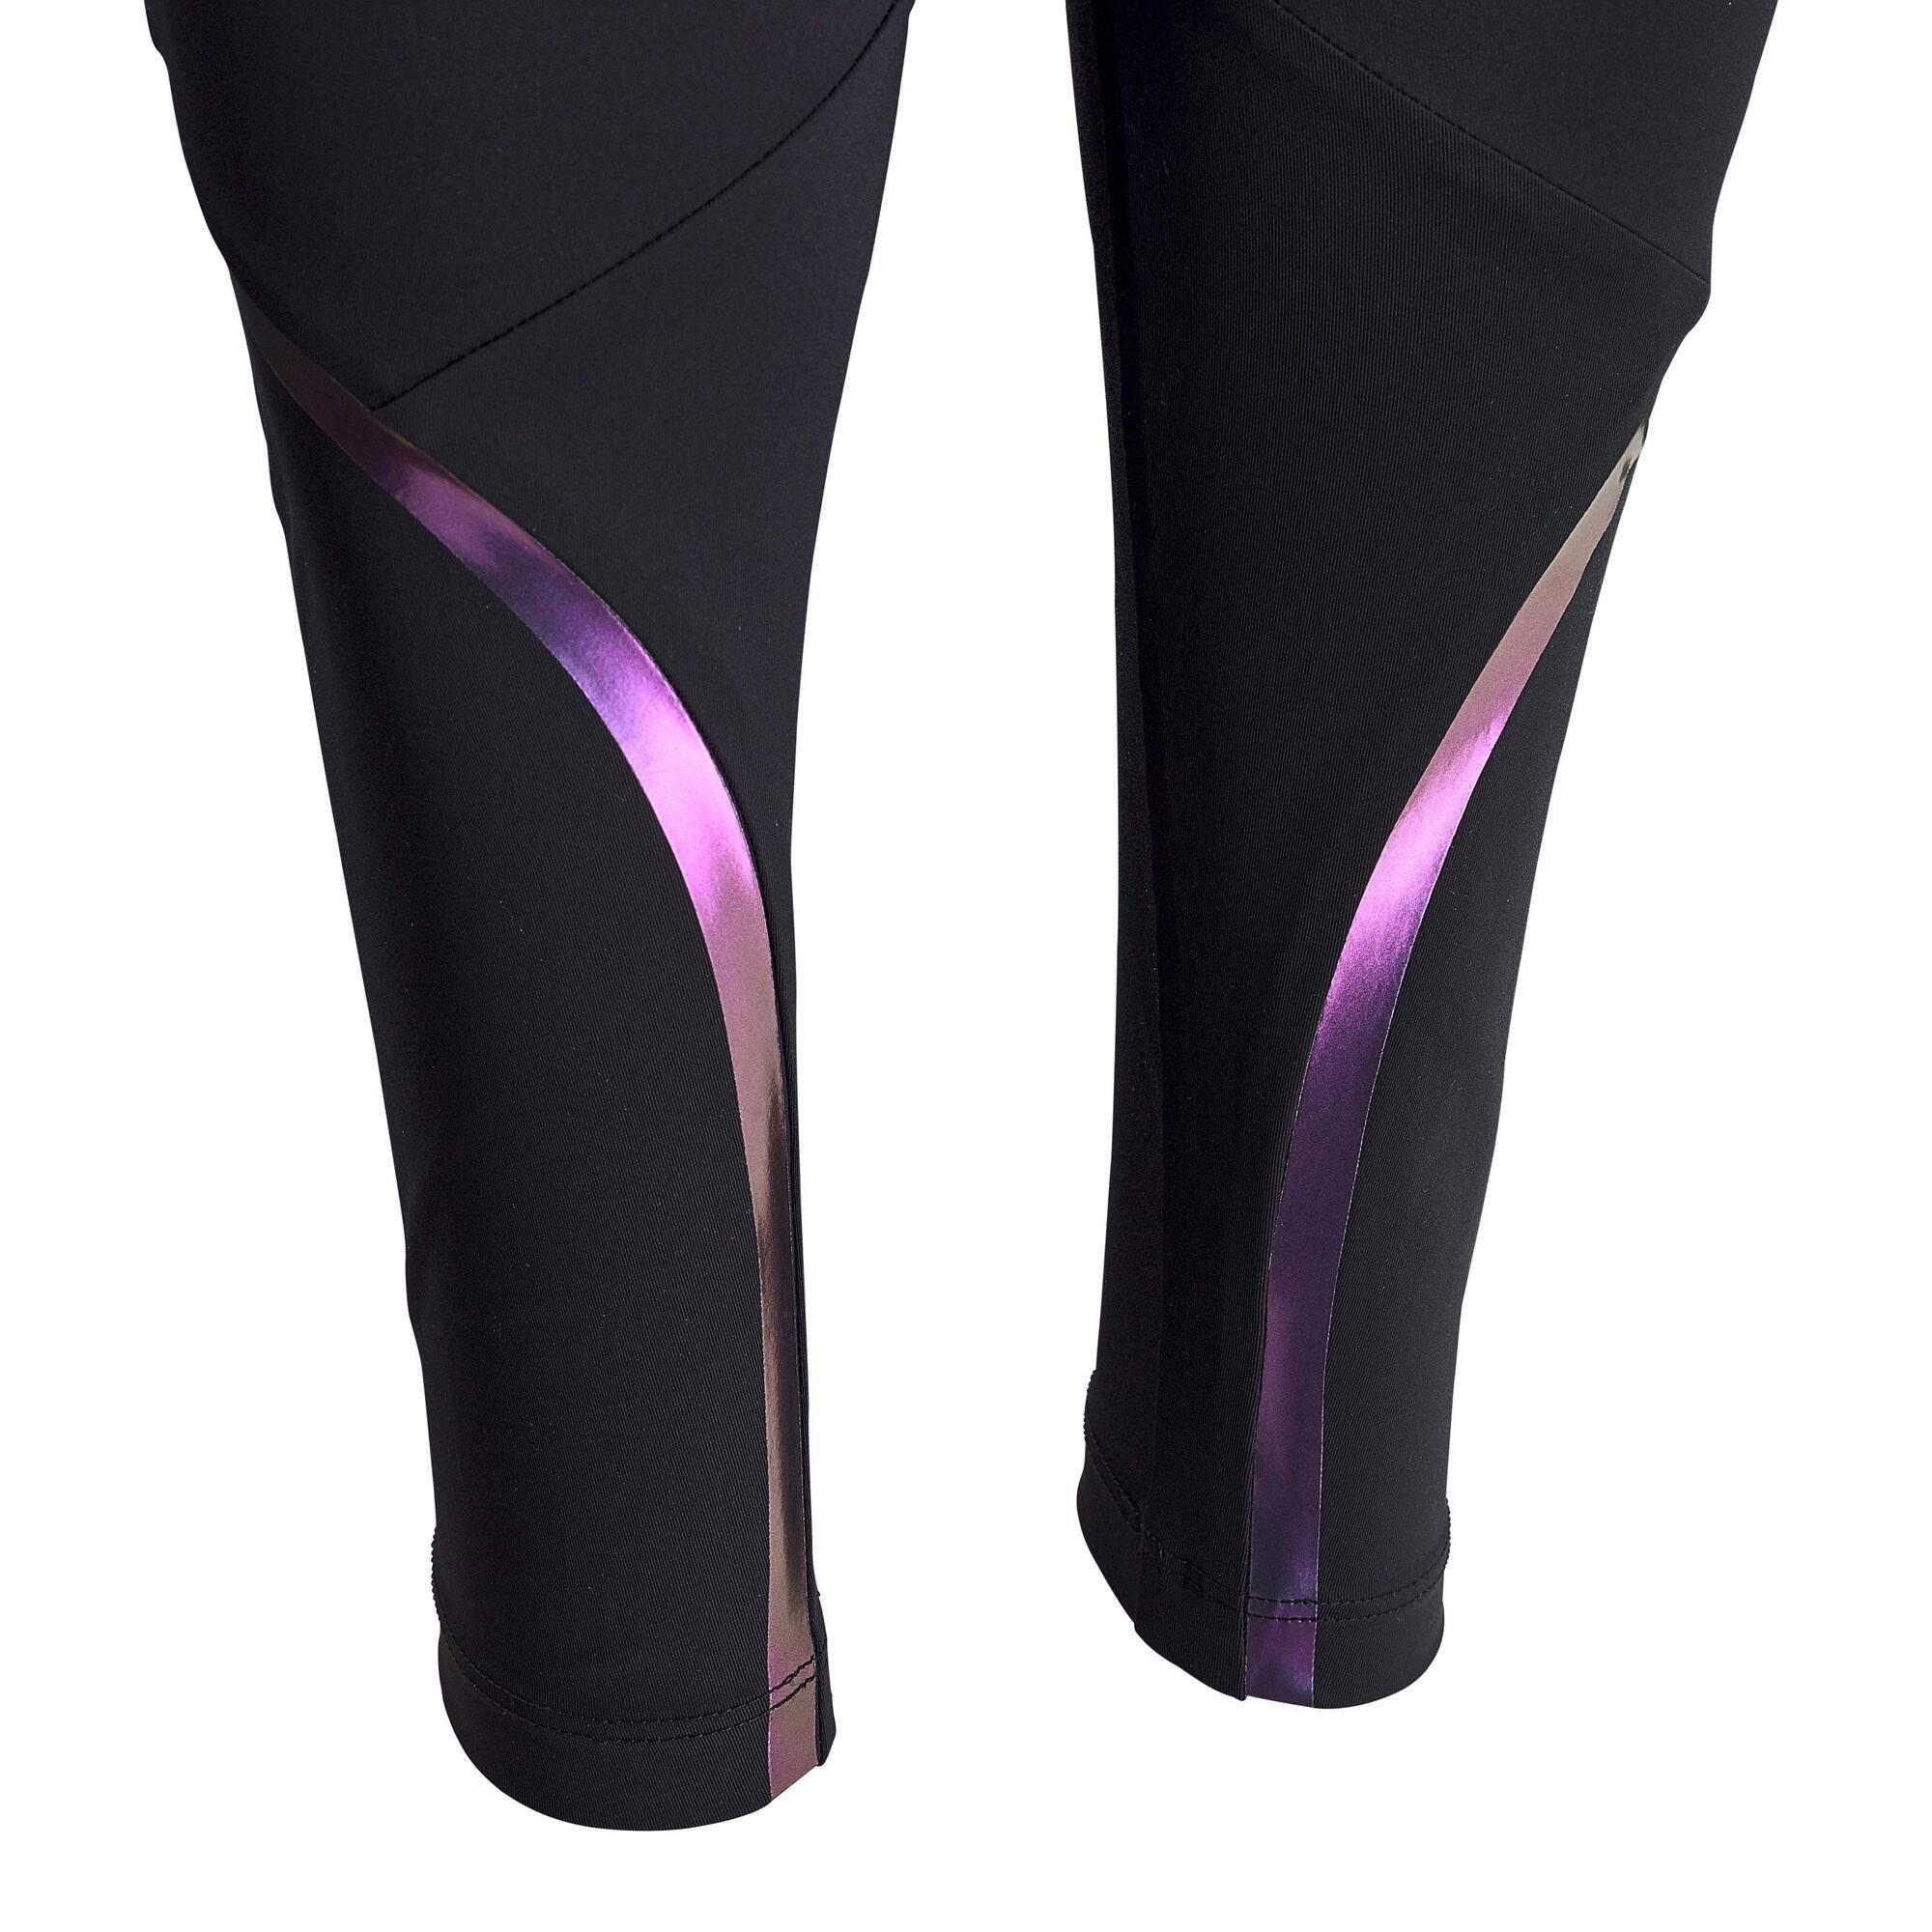 Leggings, Decathlon Cool Weather Cycling Tights Rcr